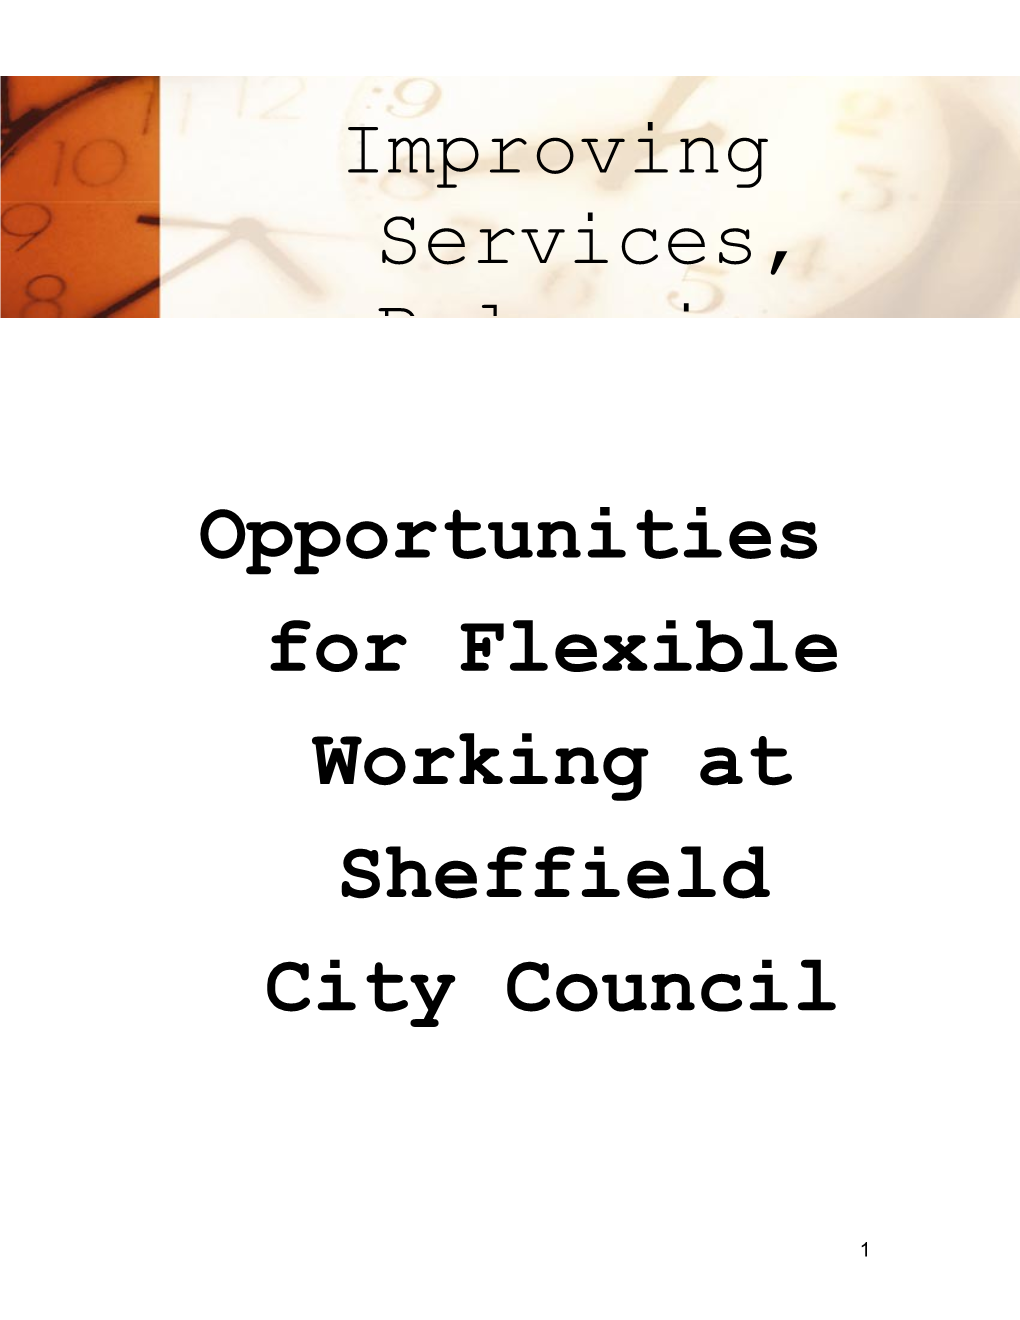 Opportunities for Flexible Working at Sheffield City Council